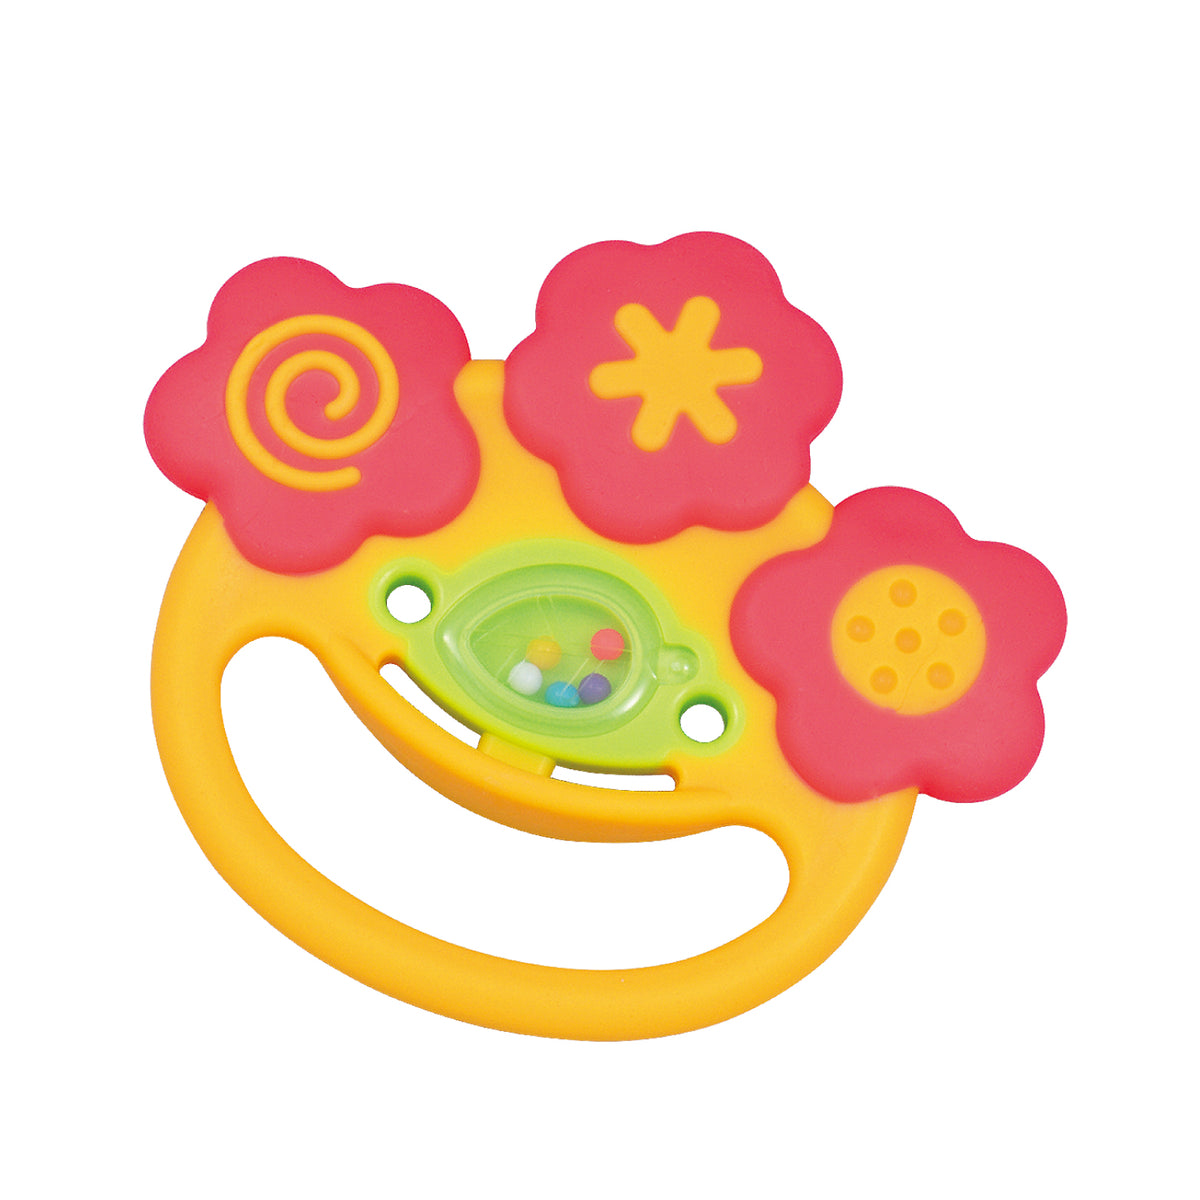 Toyroyal Love of Mom Series - Smiley Rattle Teether